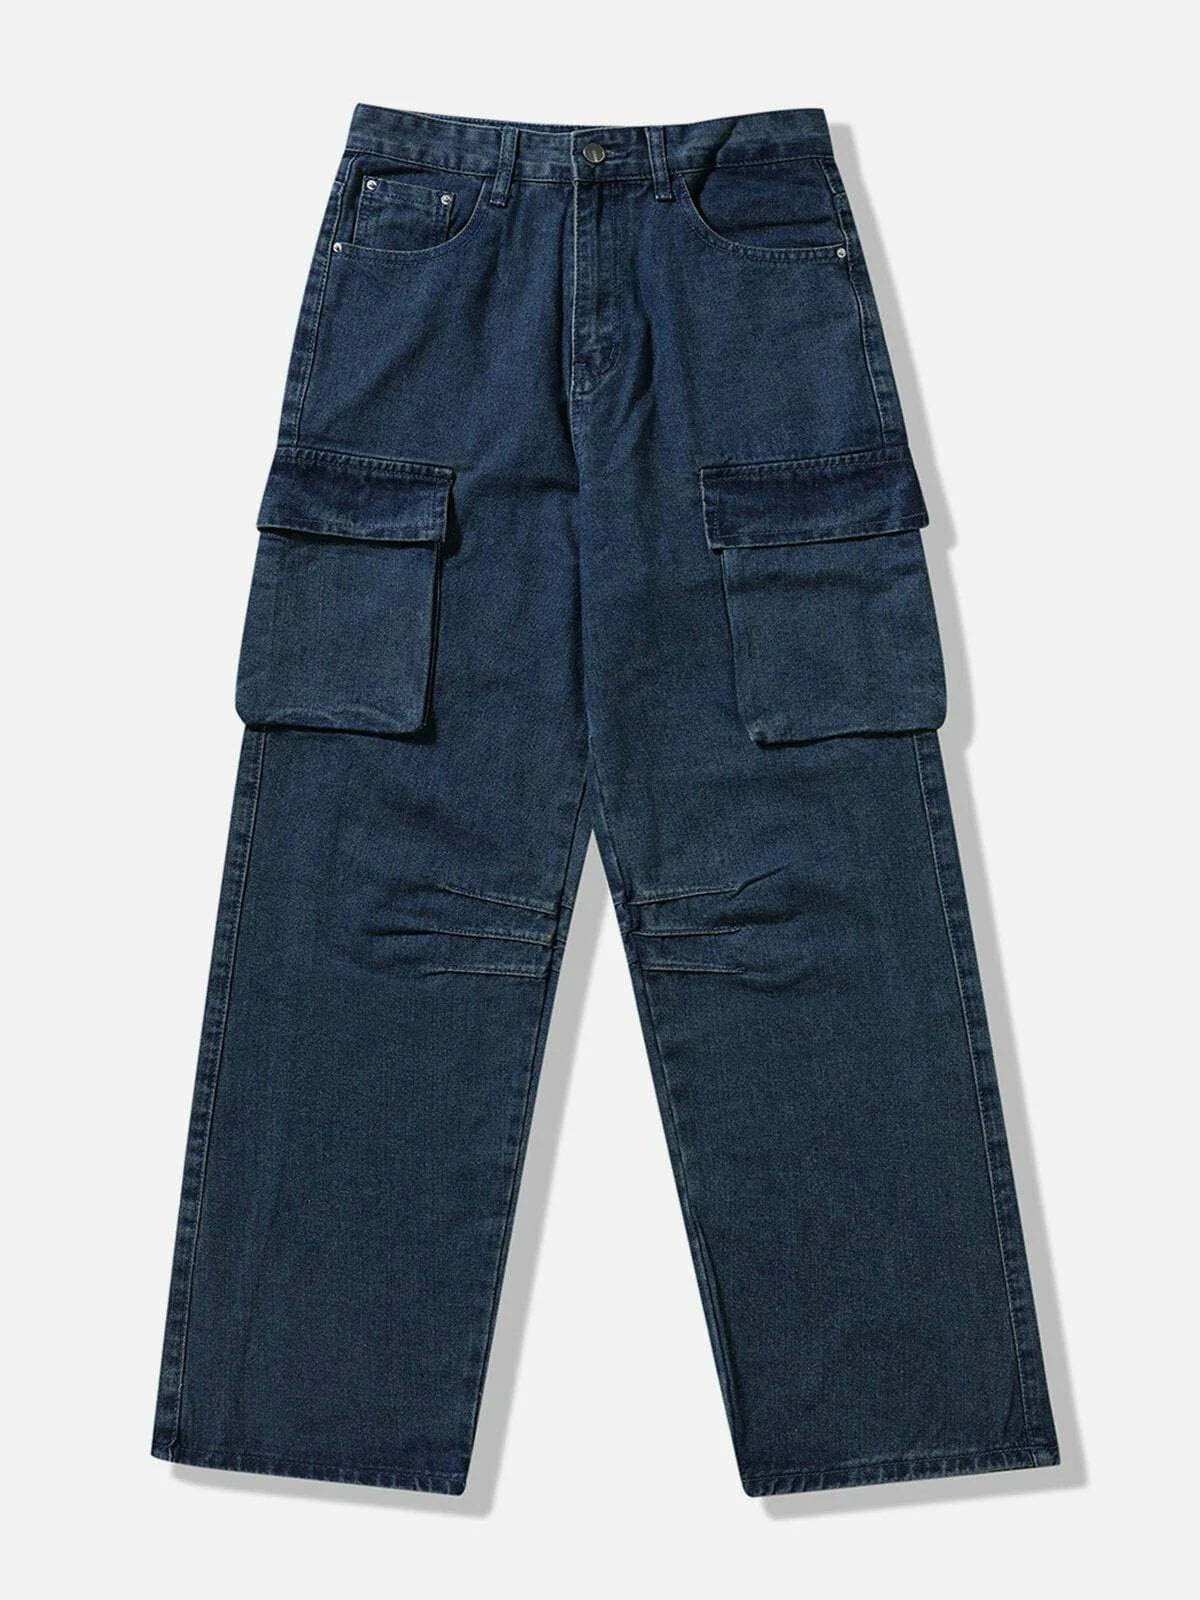 ruched jeans with oversized pockets edgy & functional 3196